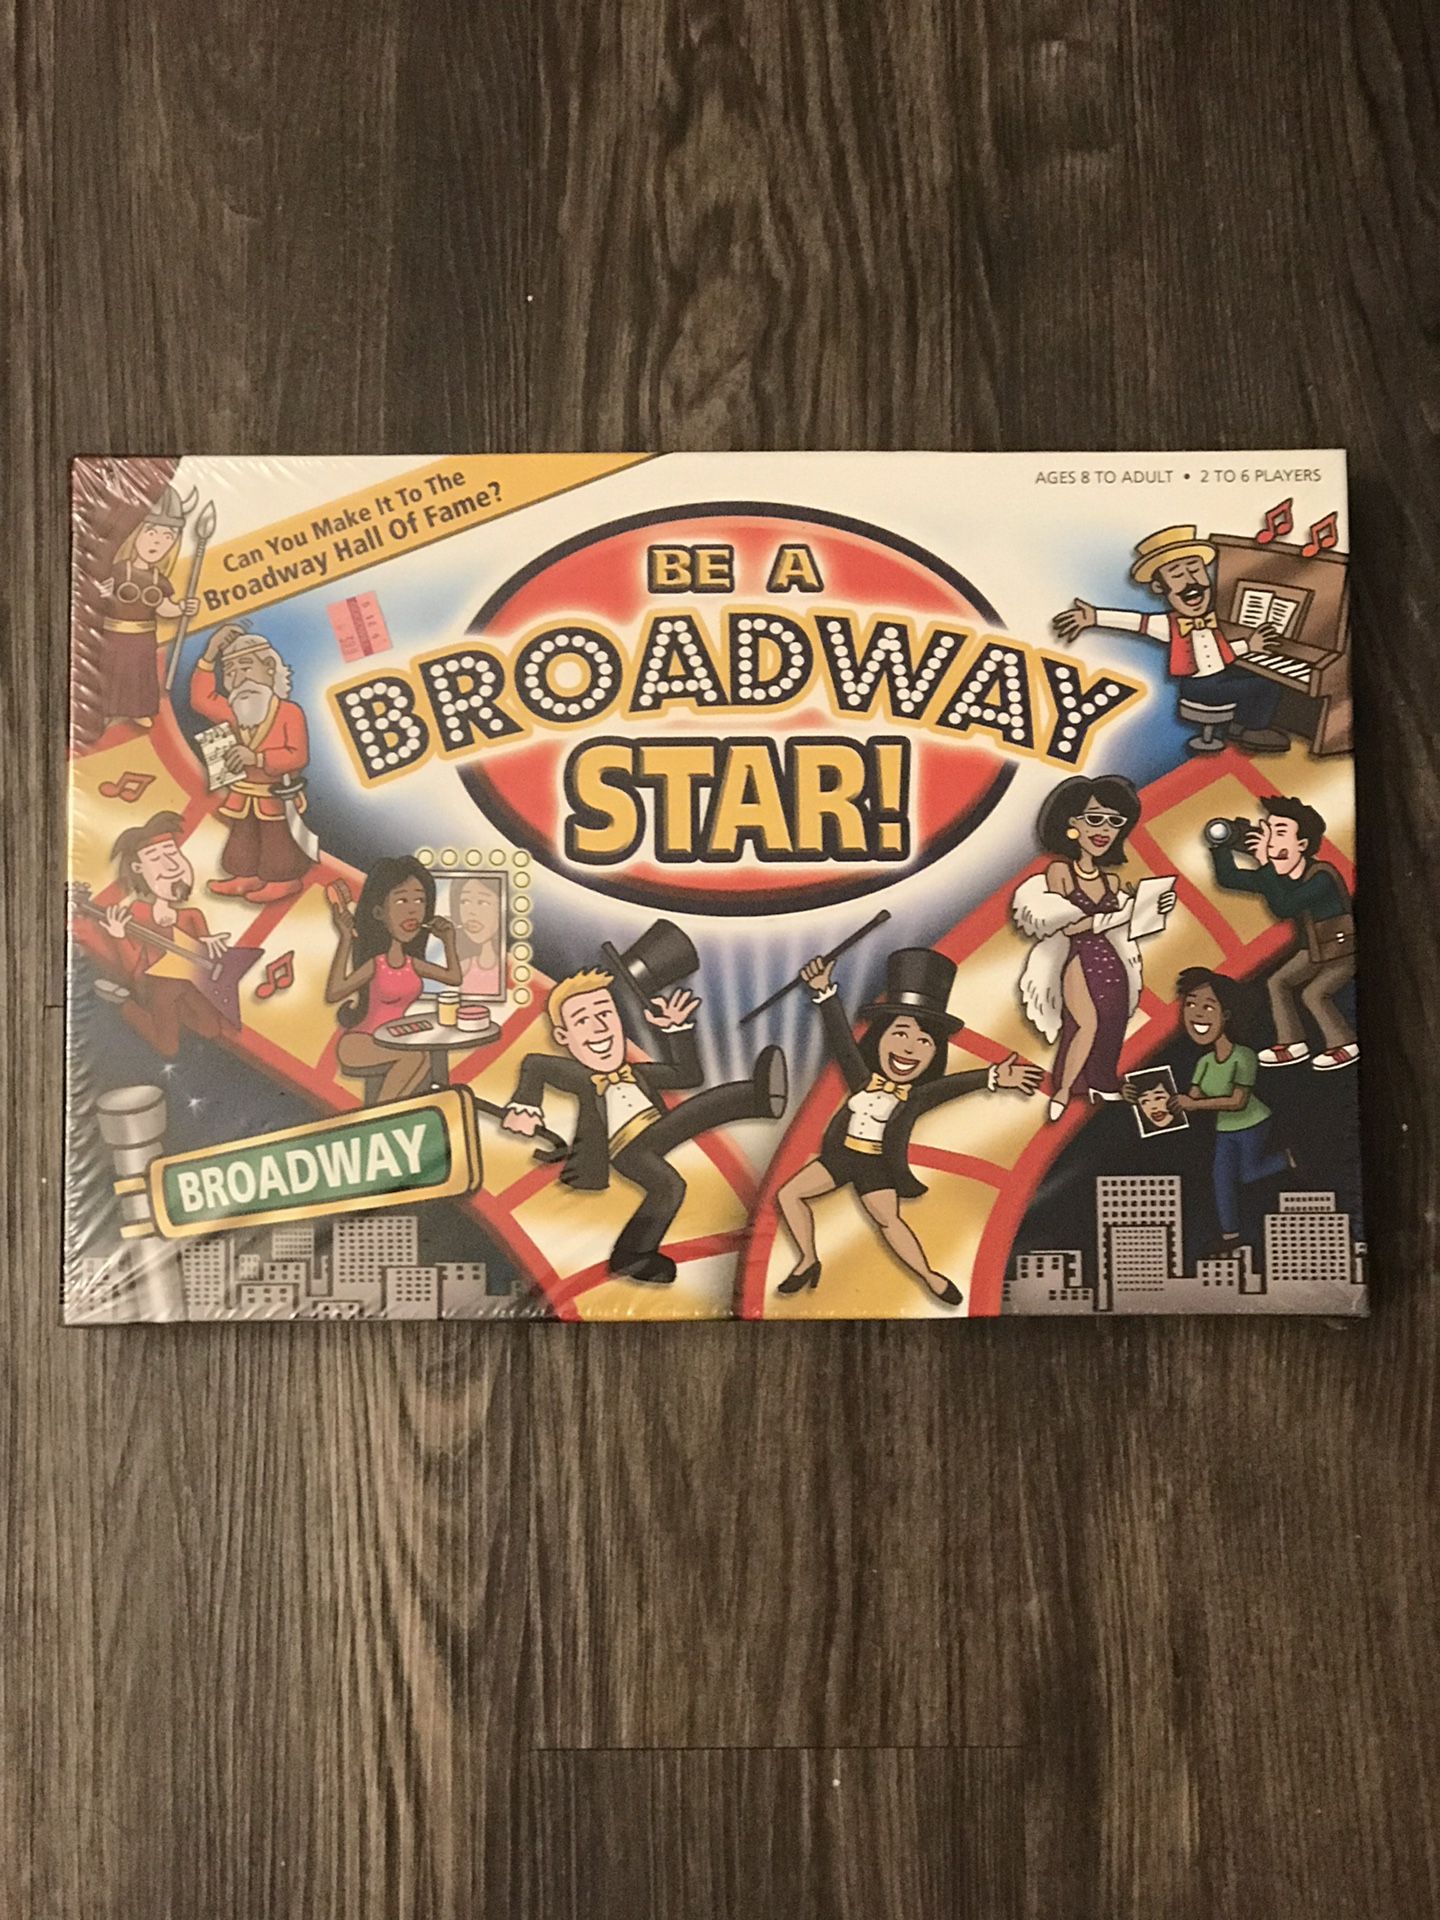 New - Be a Broadway Star! Board Game